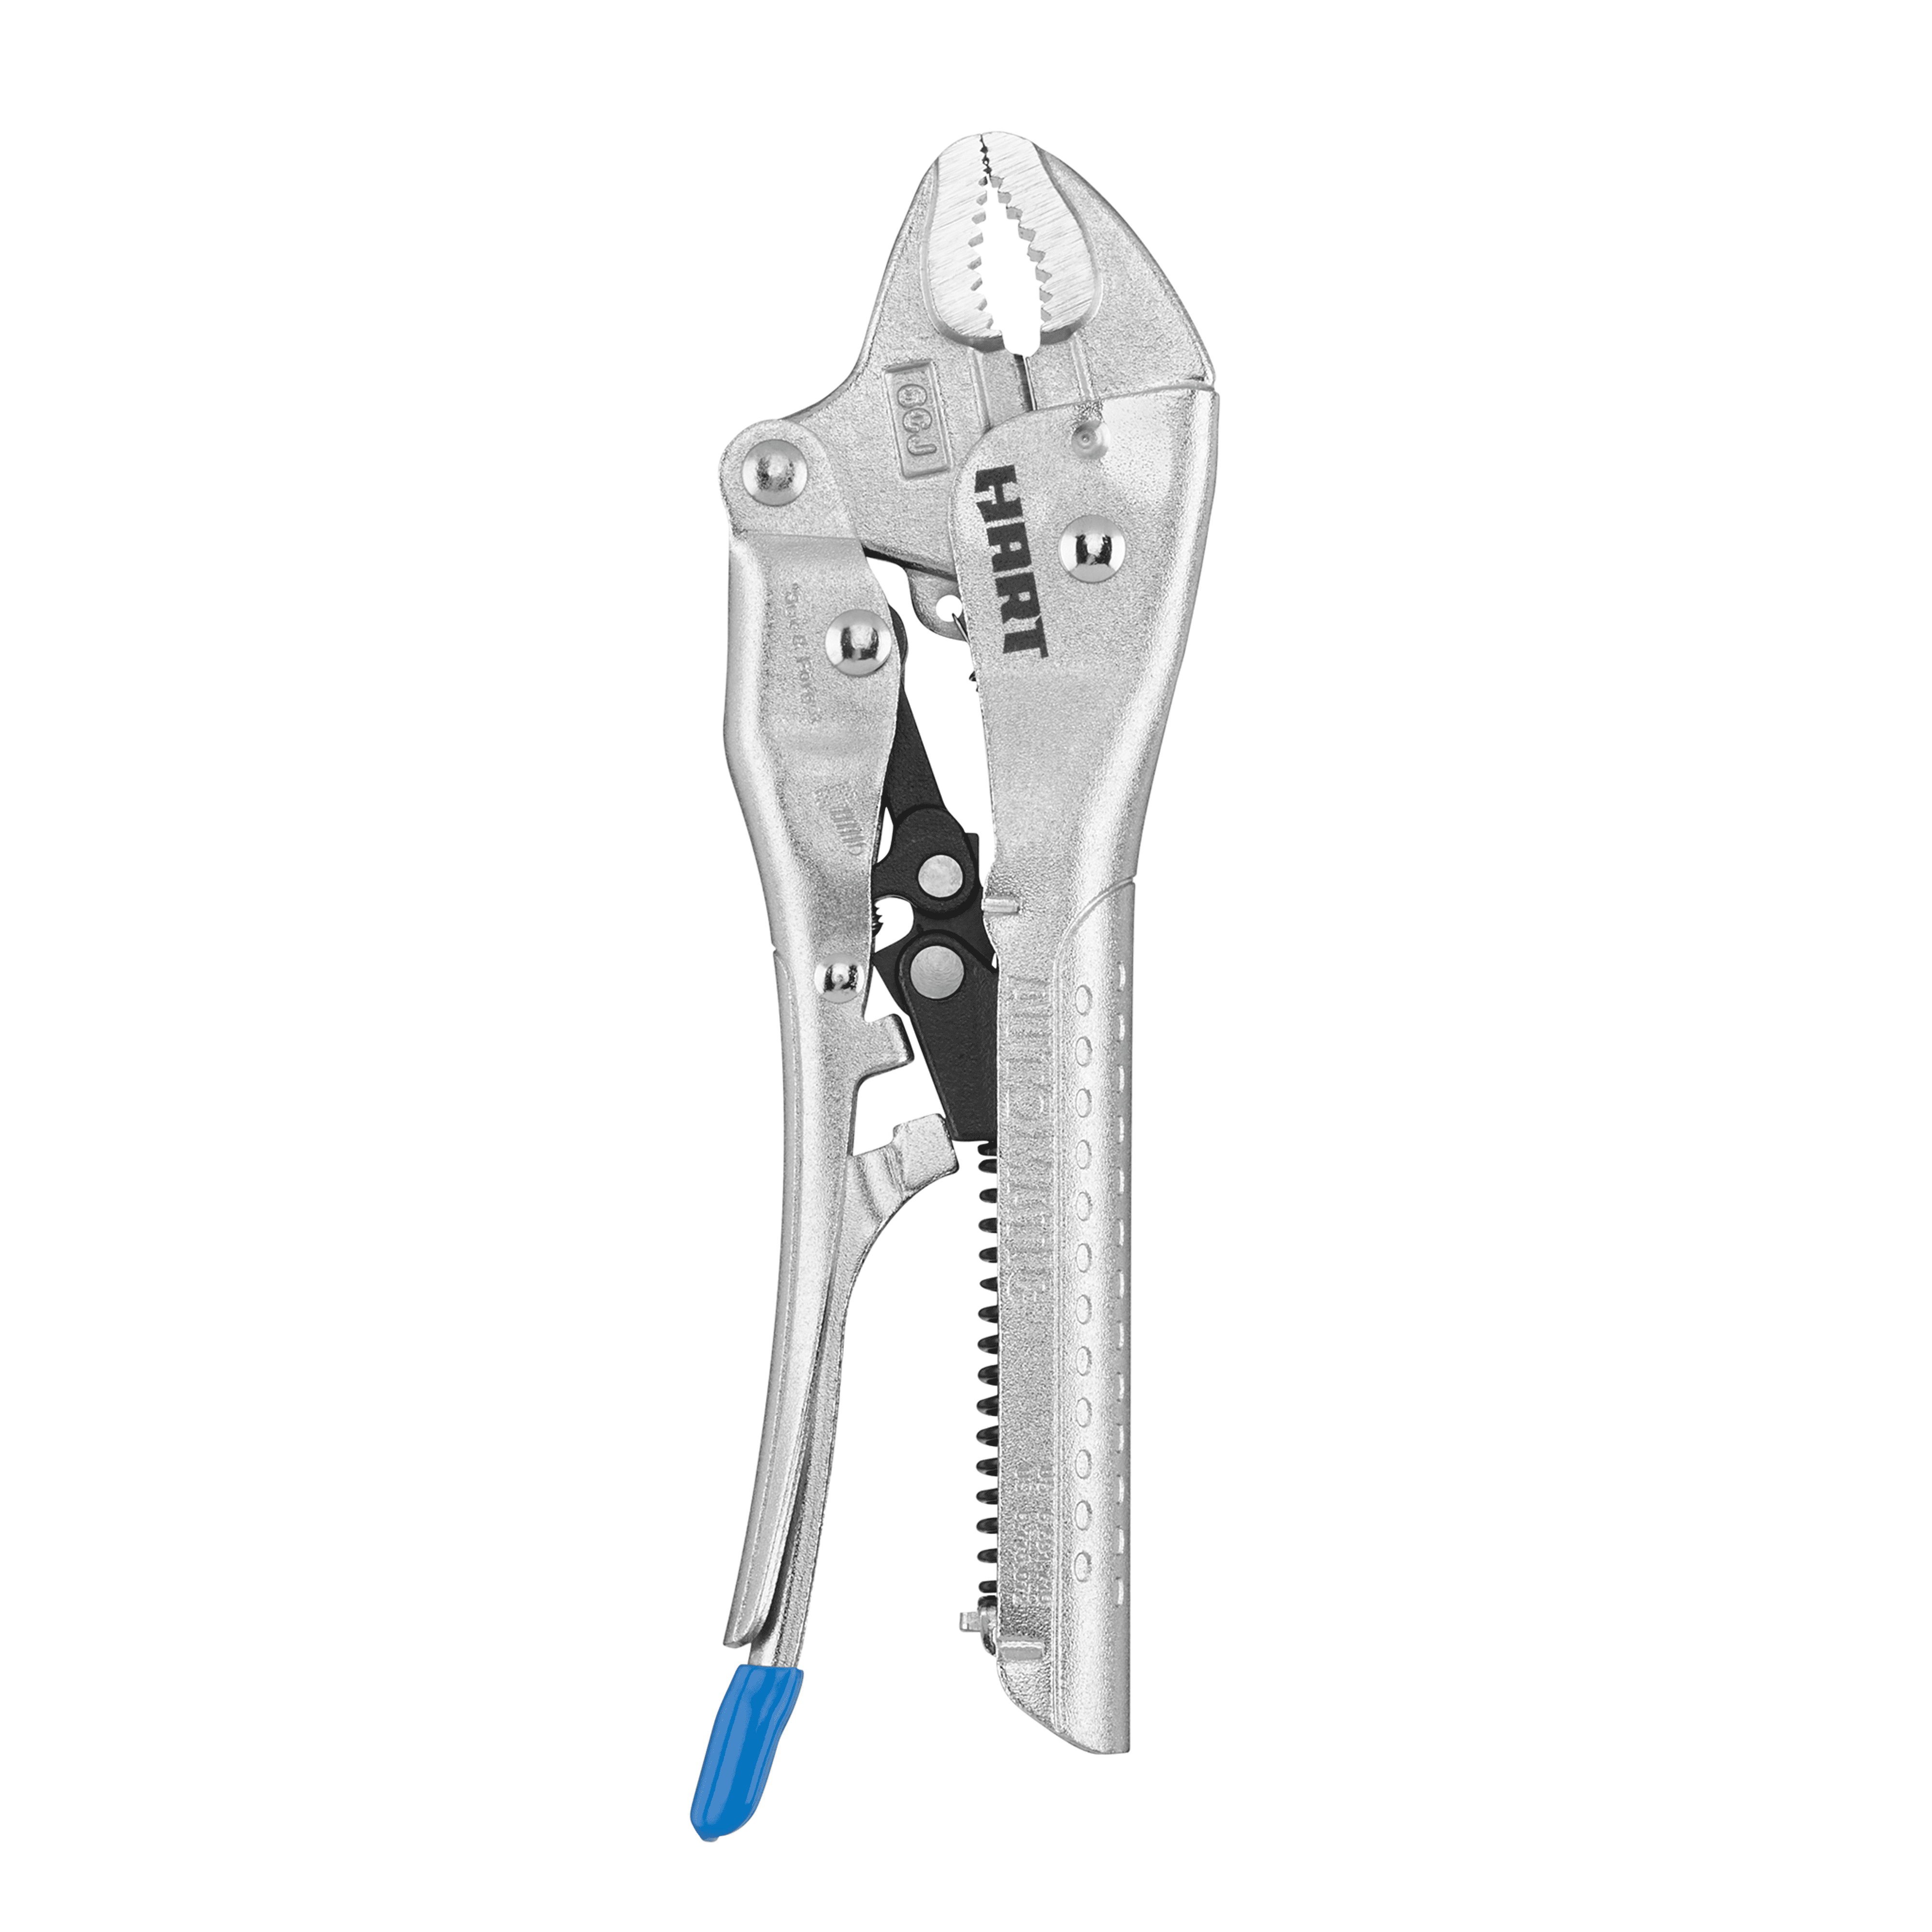 Long Reach Locking Pliers LIFE TIME WARRANTY PITTSBURGH 15 in 